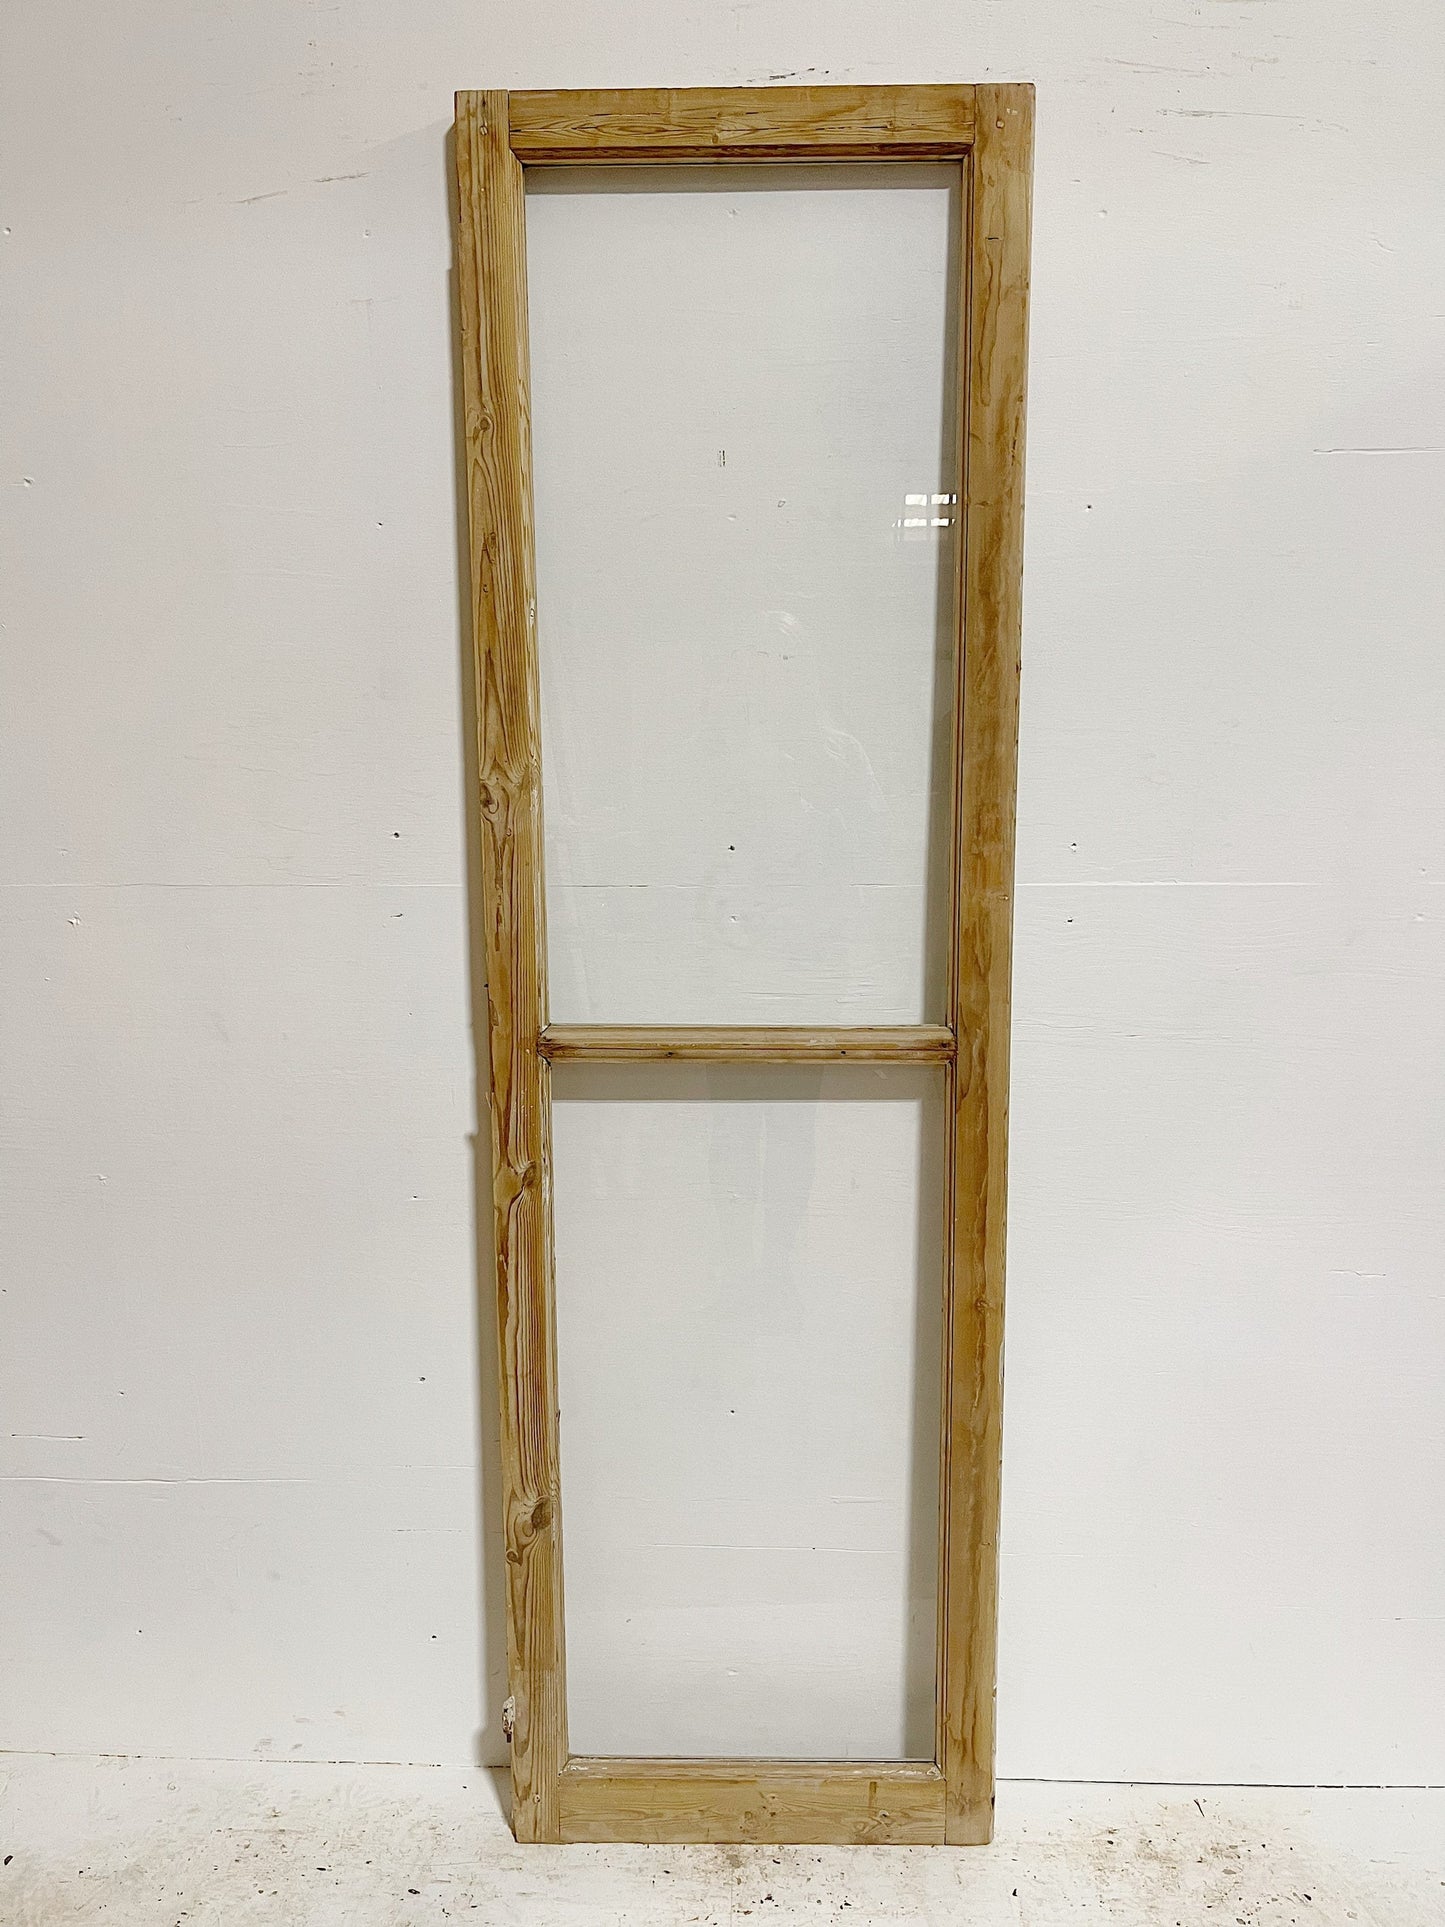 Antique French door (82x24.75) with glass E1149B